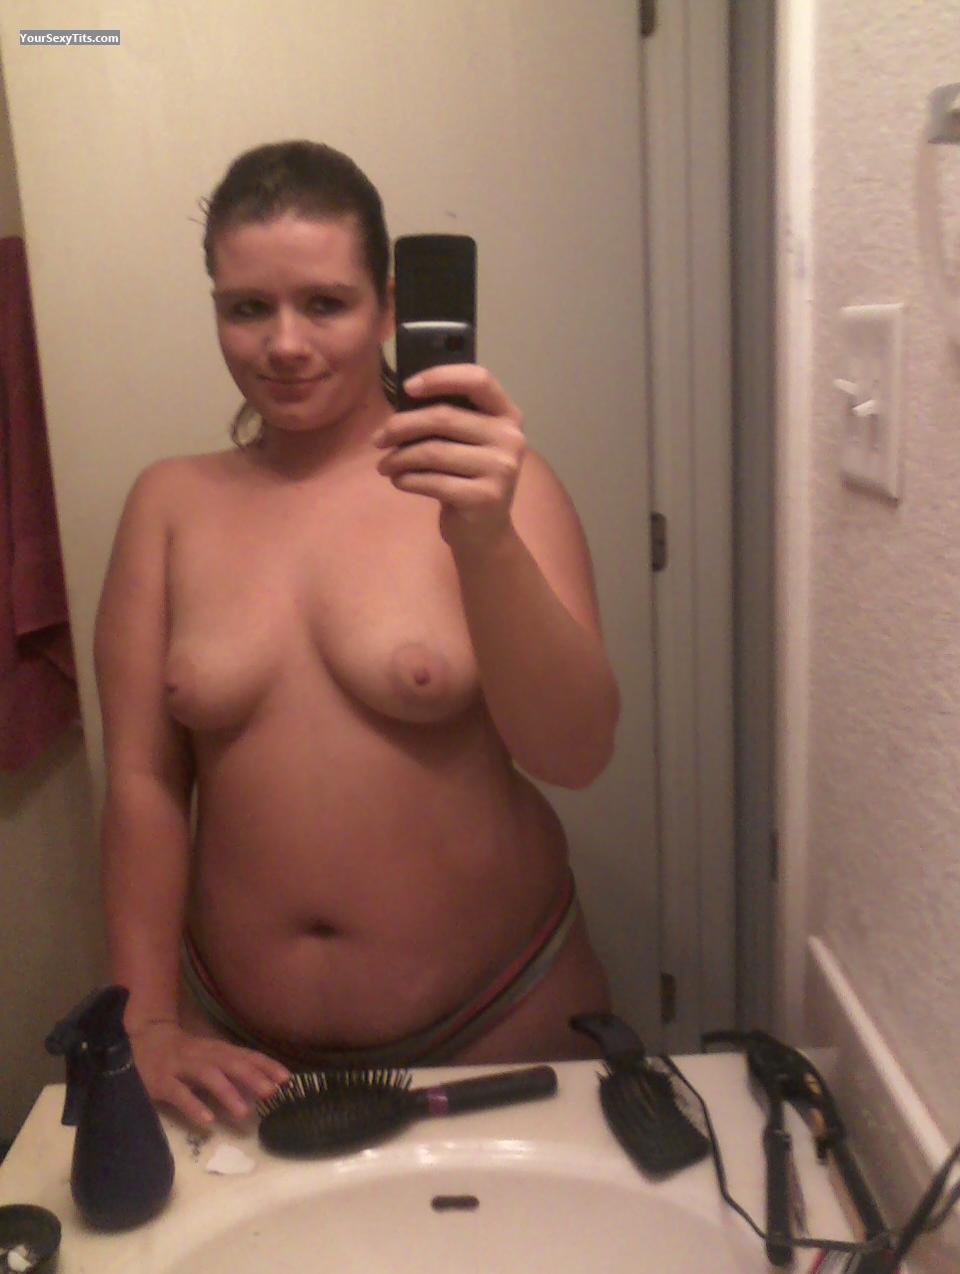 Tit Flash: My Small Tits (Selfie) - Topless Kayla from United States